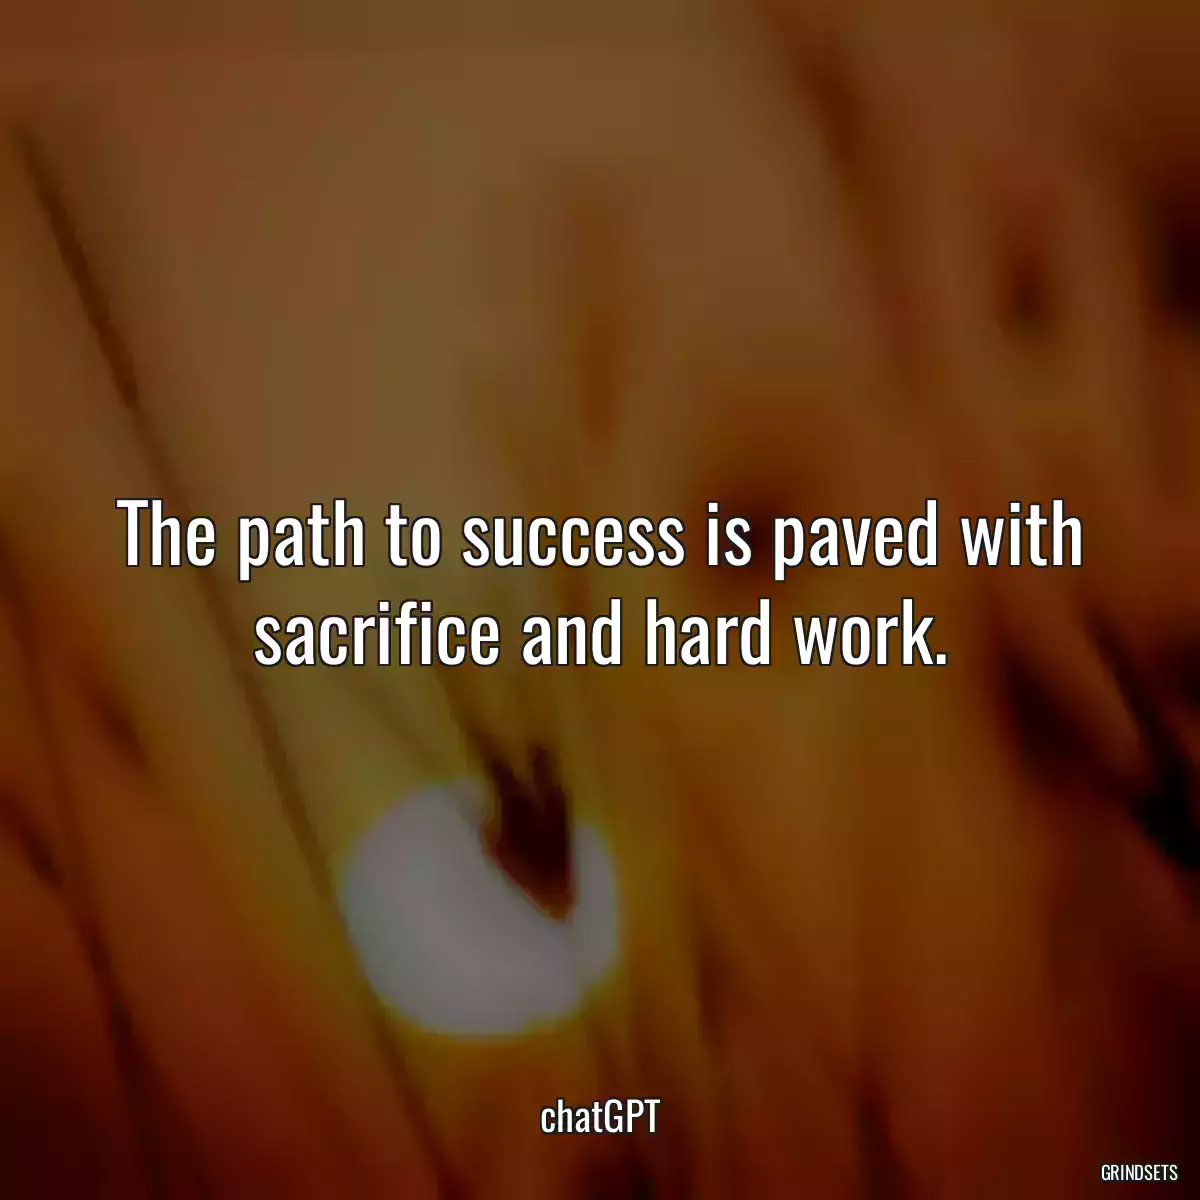 The path to success is paved with sacrifice and hard work.